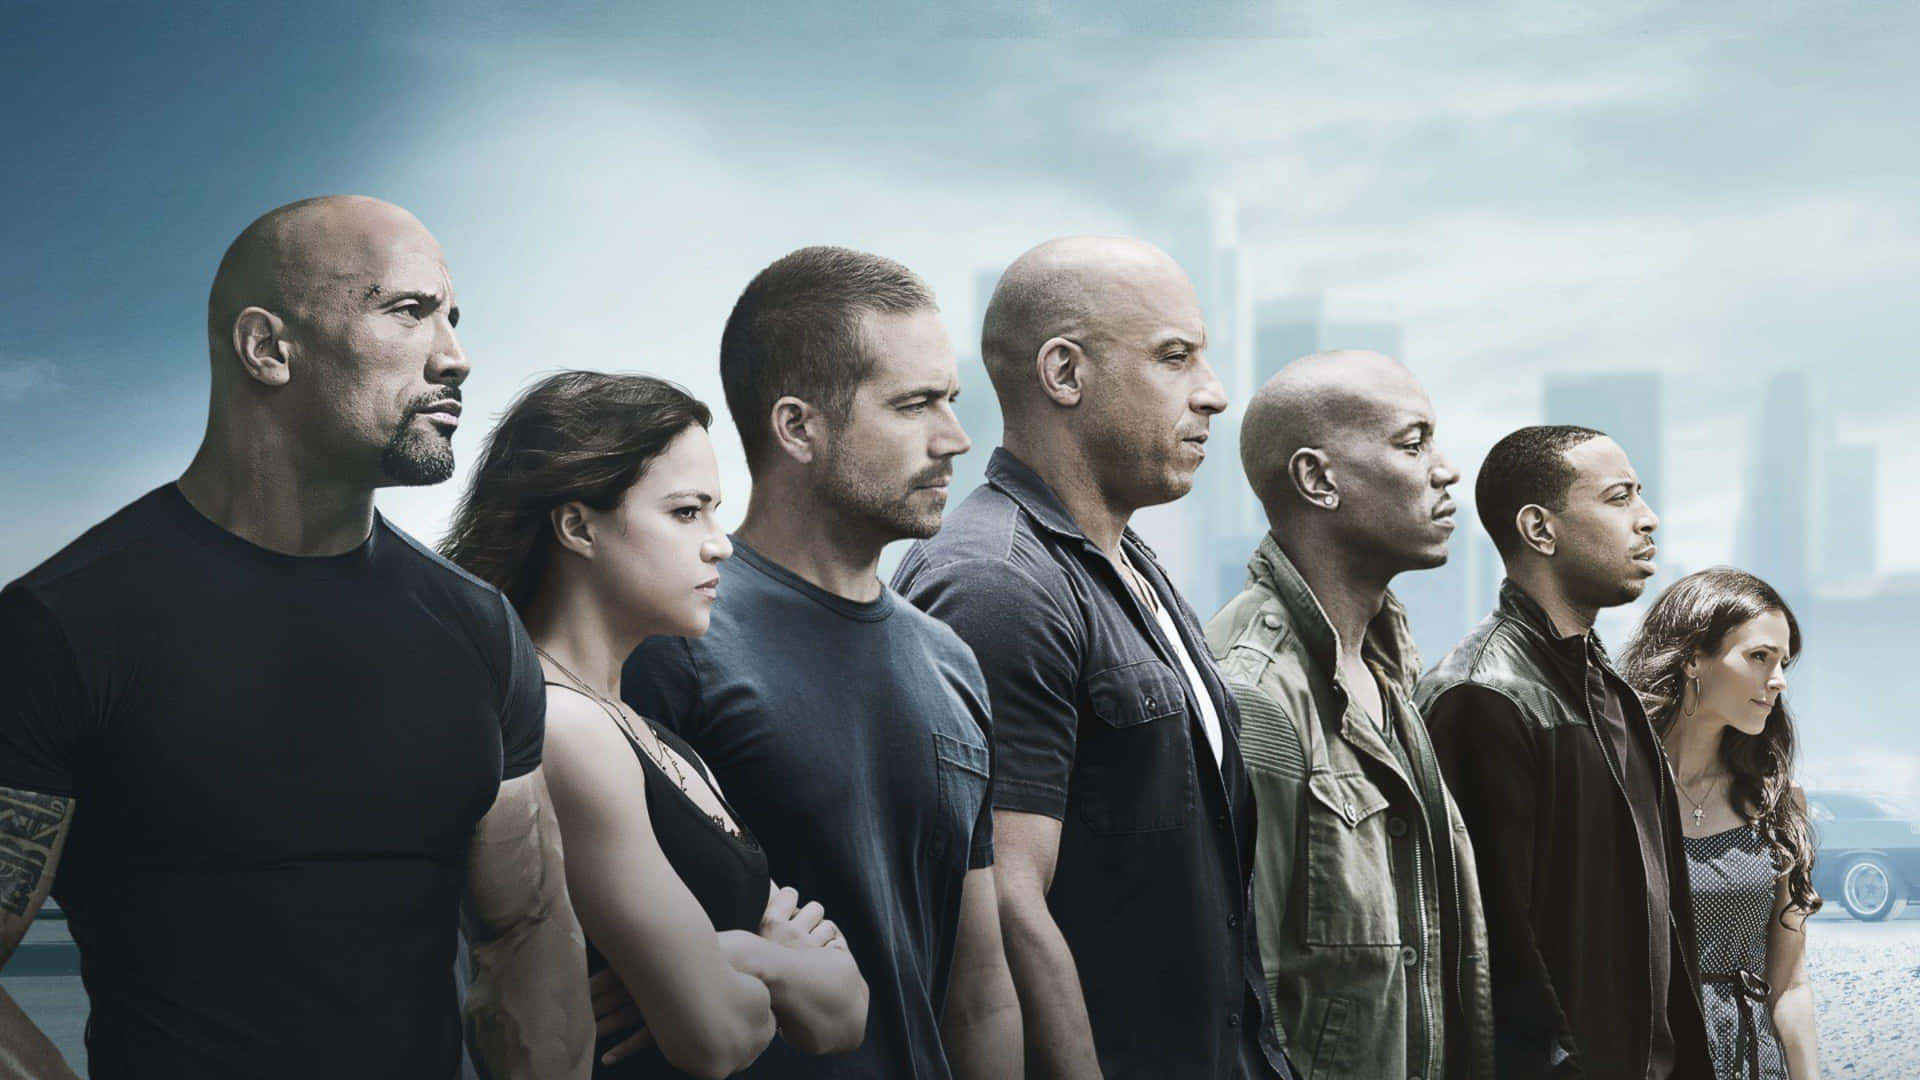 Get ready for high octane action as Fast And Furious 9 drives into cinemas this summer. Wallpaper